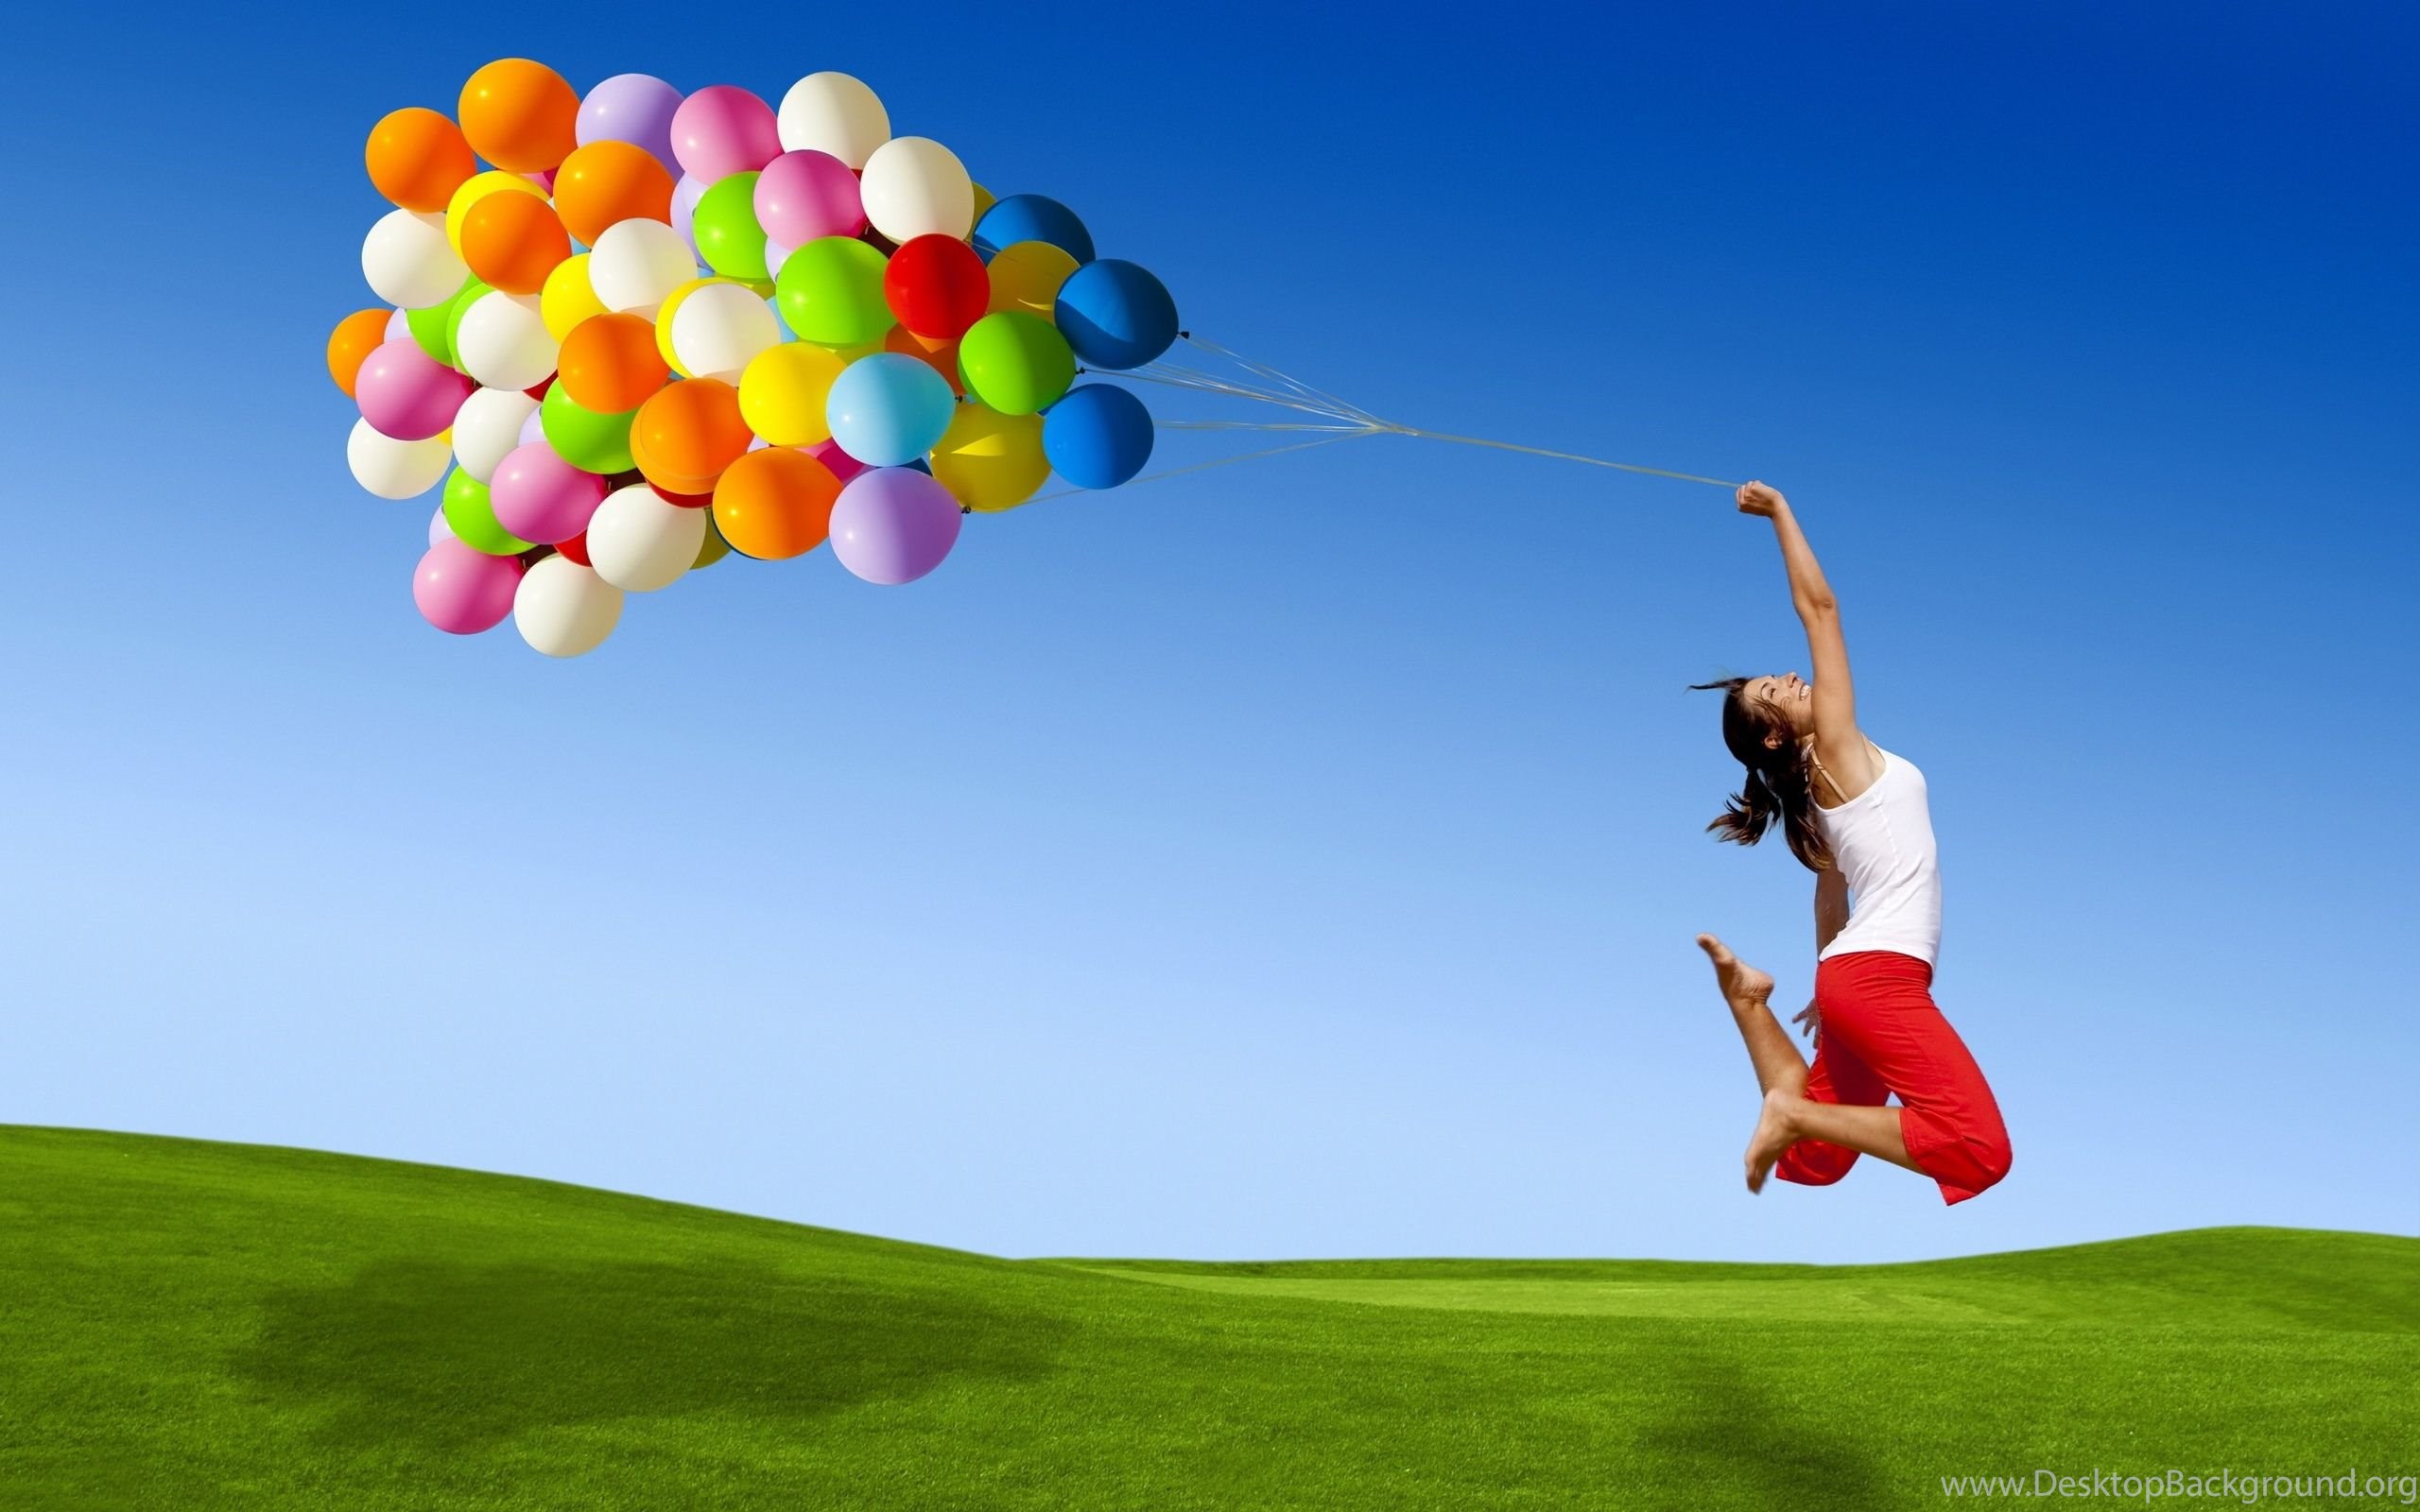 Girl And Balloons Wallpapers And Images Wallpapers Pictures Images, Photos, Reviews